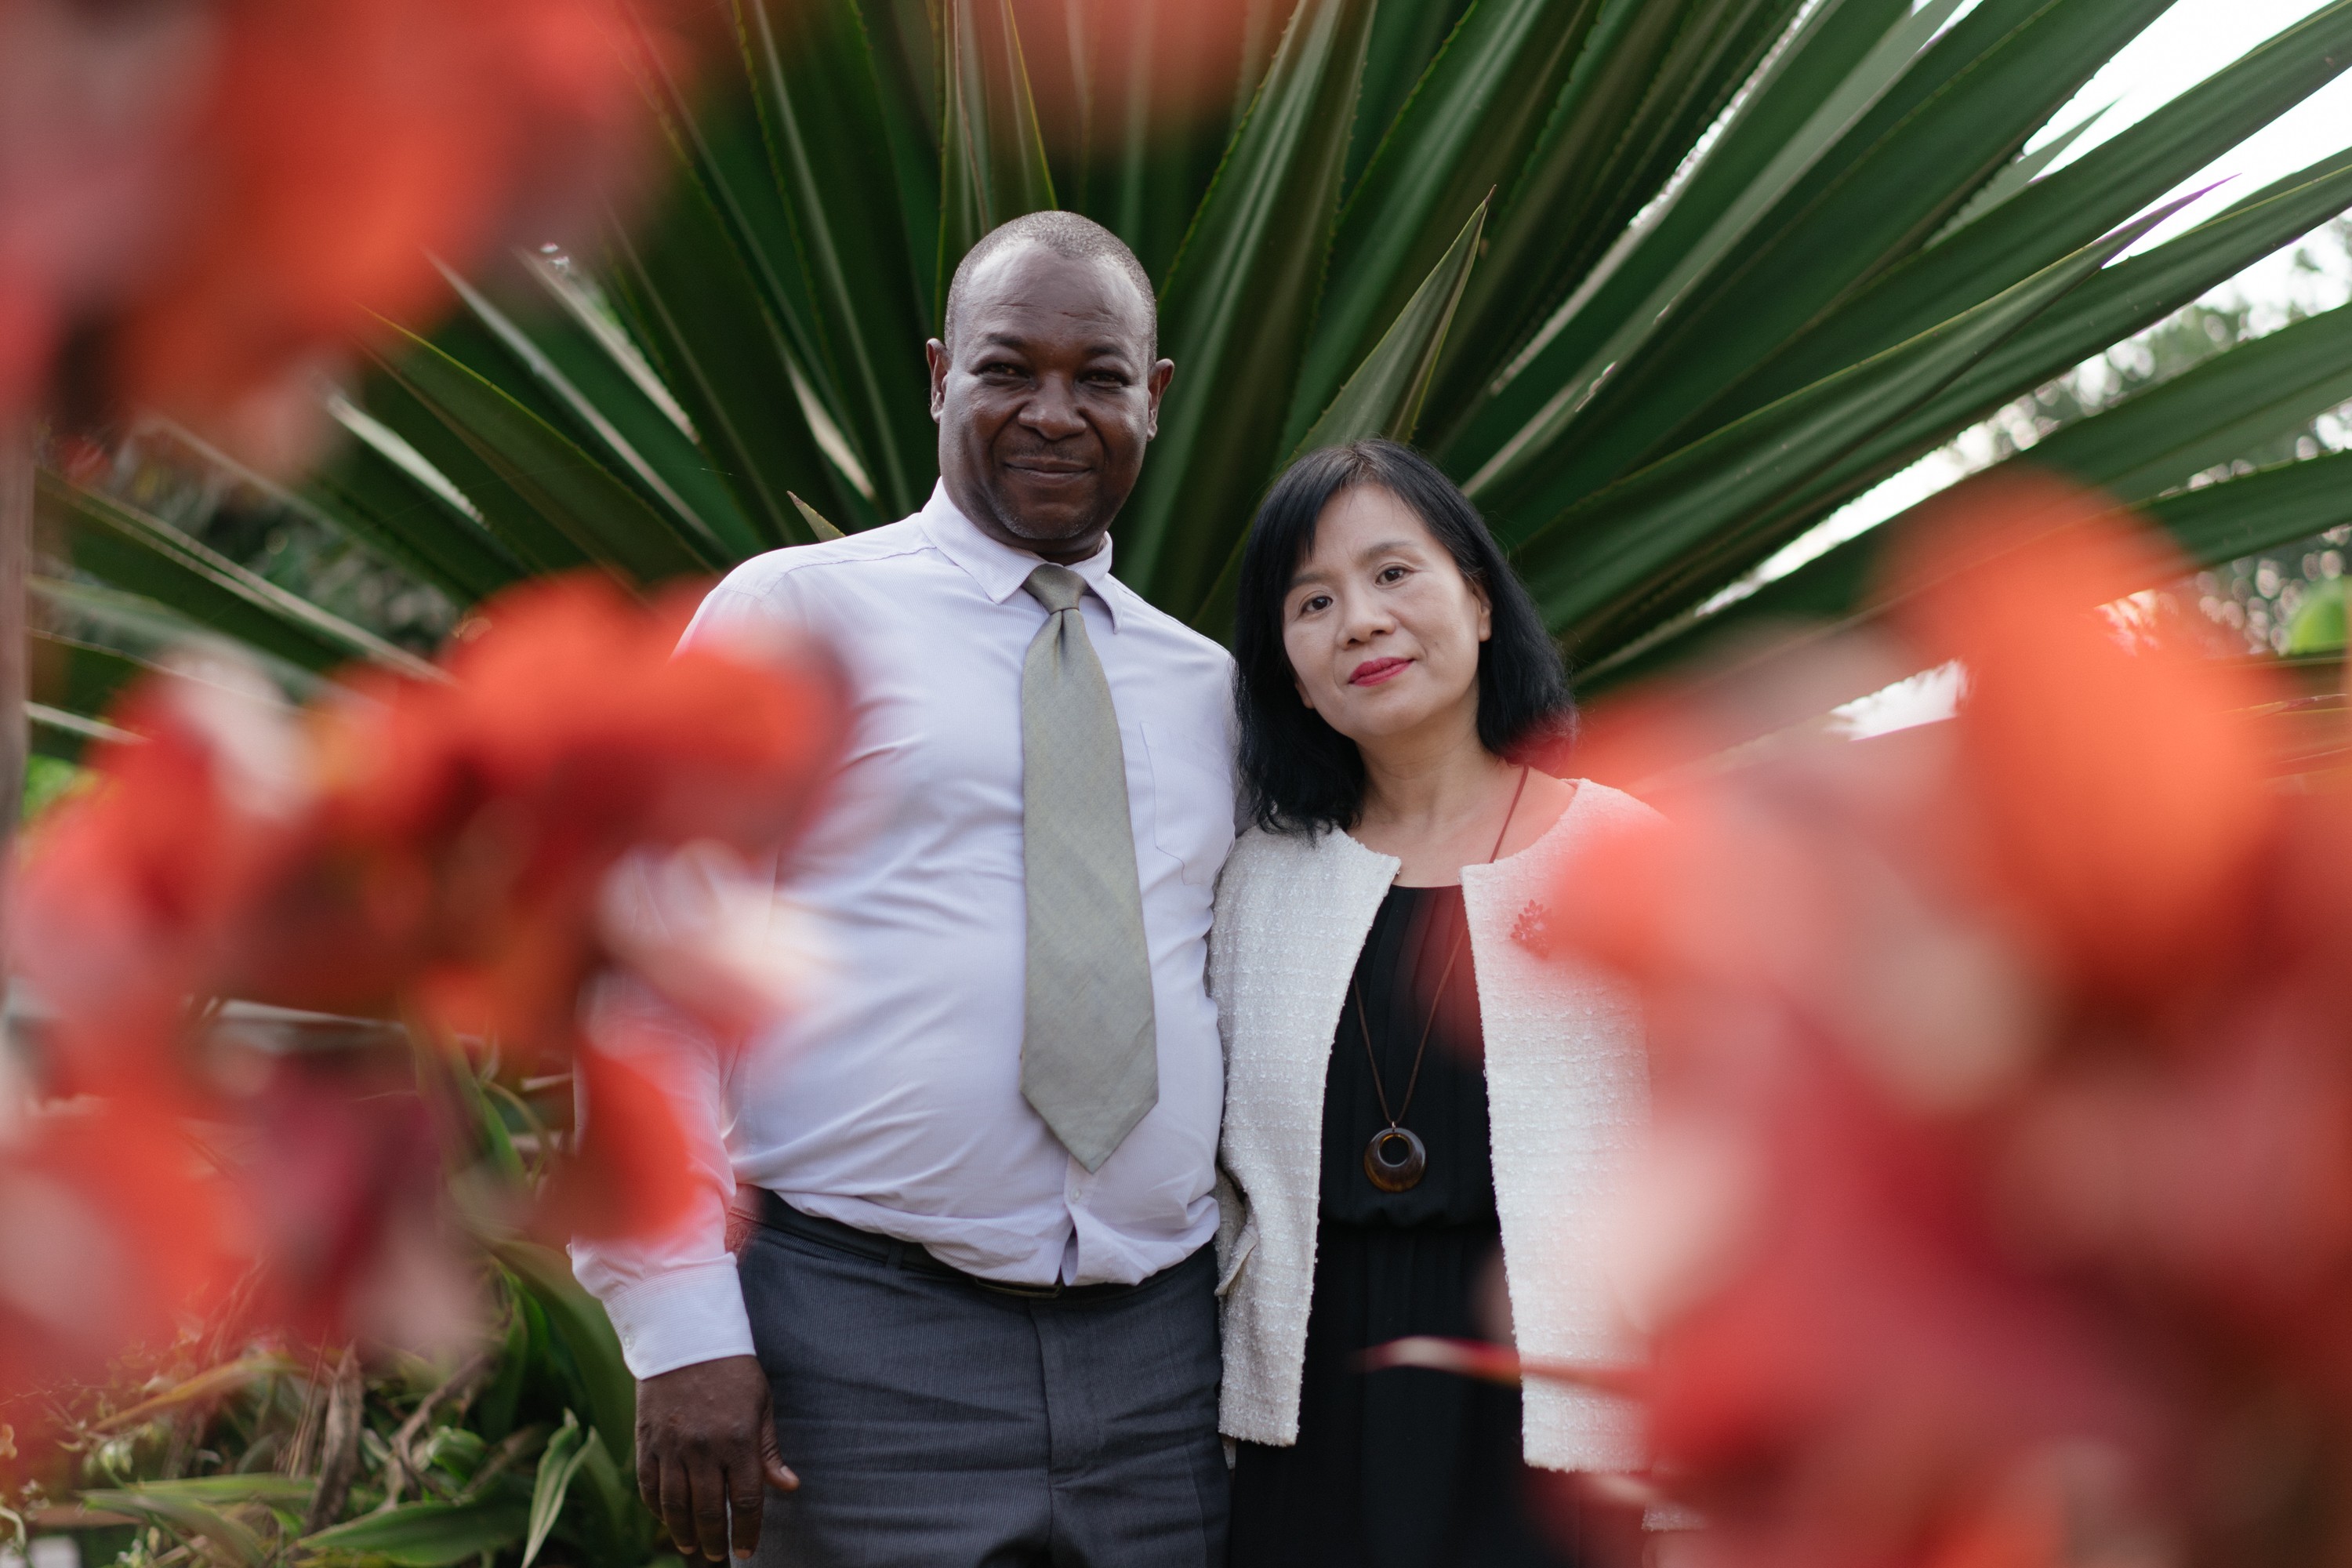 College run by Ugandan-Chinese couple is training students and educators to speak Chinese, so that they can spread the word about China in Africa